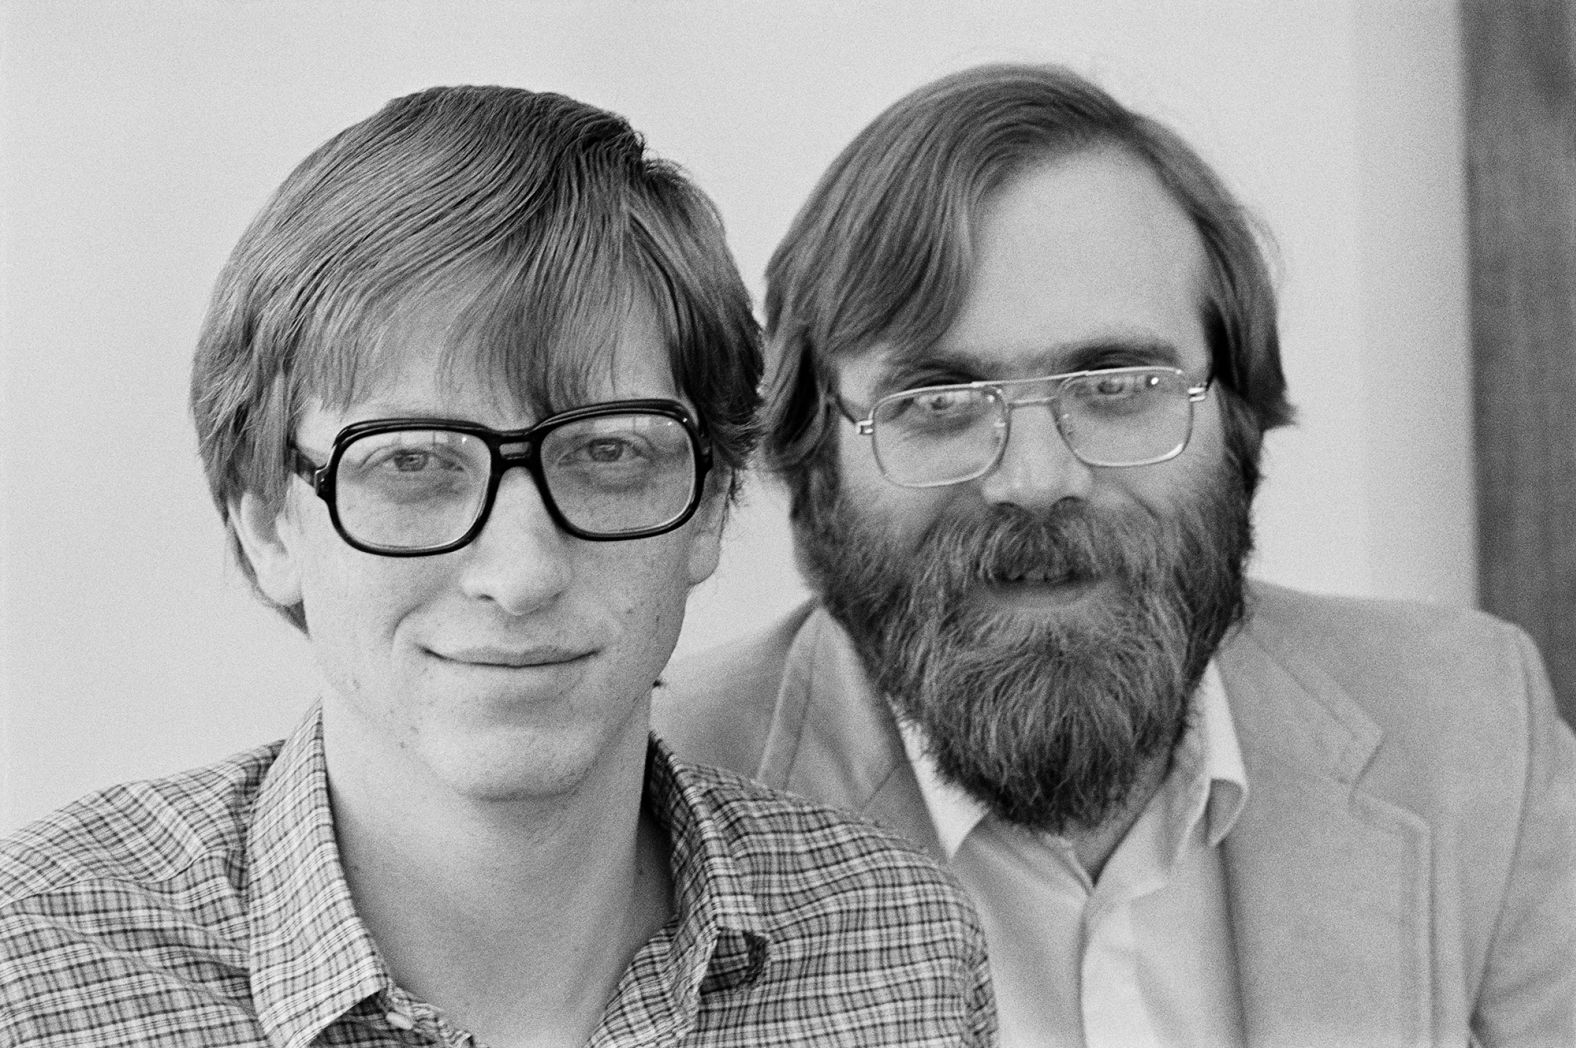 Gates and Allen in 1983, just after completing MS-DOS (Microsoft Disk Operating System) for the Tandy laptop and signing a contract to write MS-DOS for IBM. Microsoft had 100 employees in an office in downtown Bellevue, Washington. 